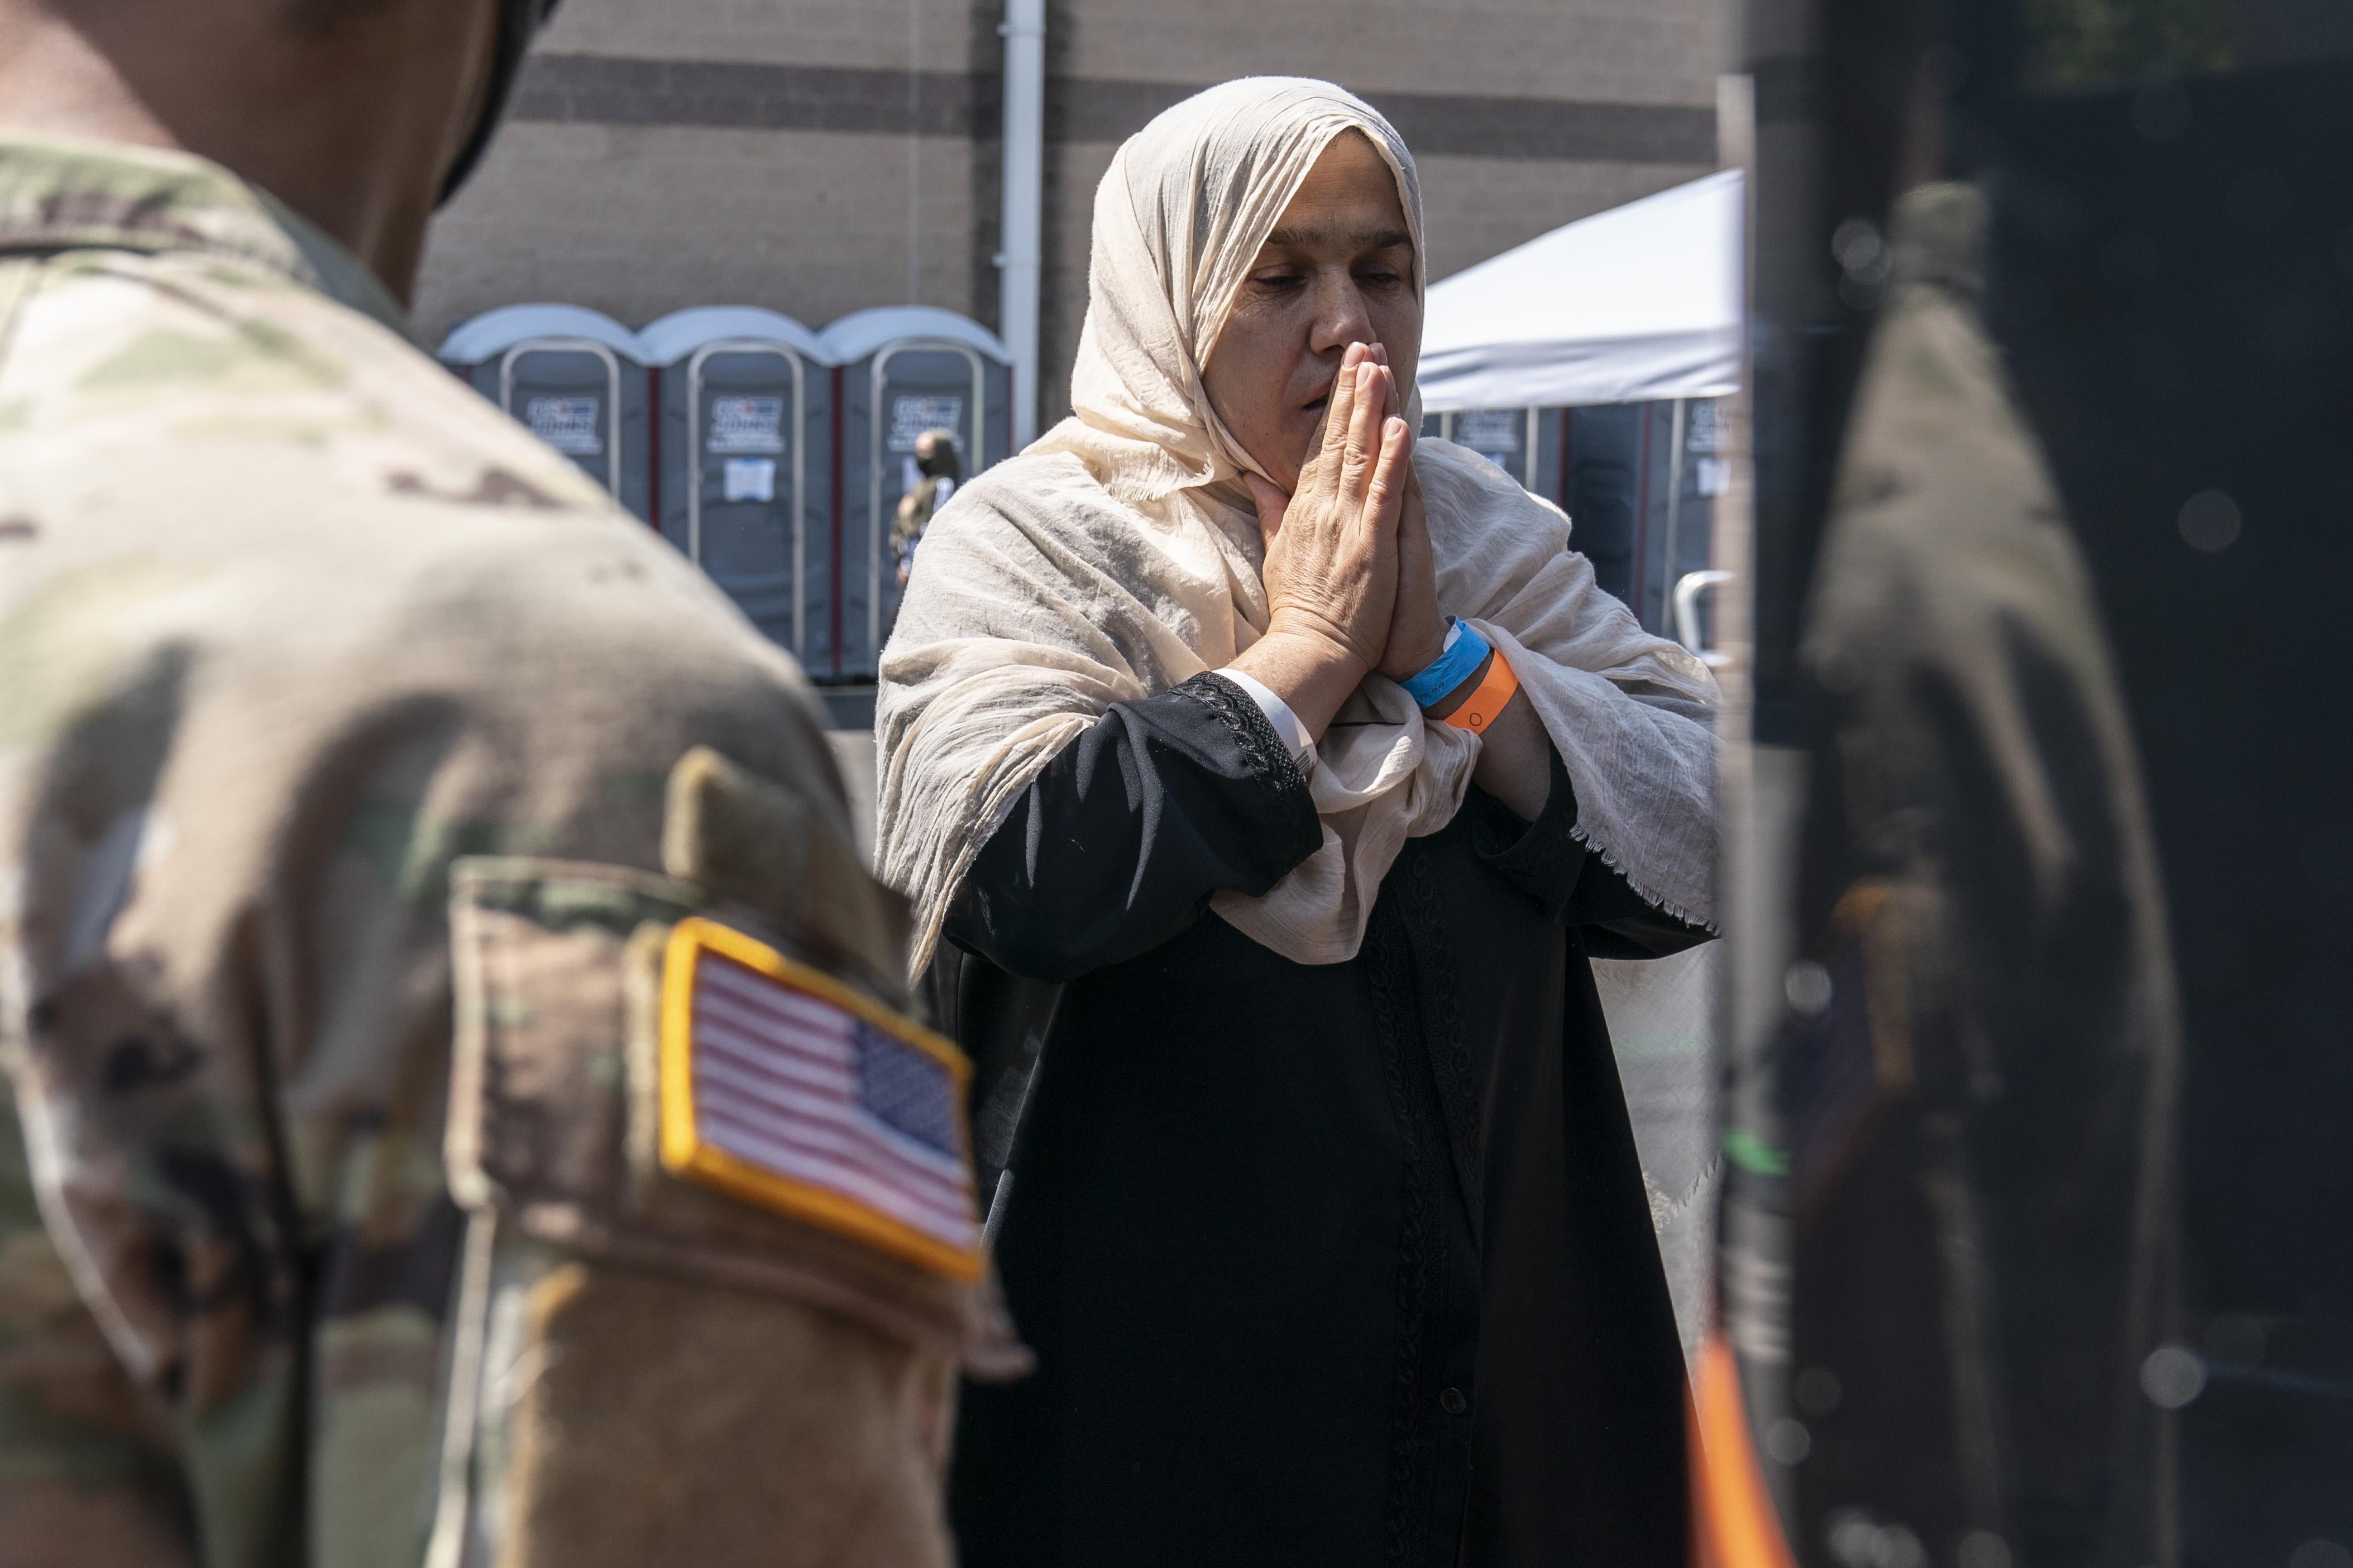 A woman stands with her hands clasped in prayer next to a bus. A U.S. service member in fatigues stands in the foreground, facing her.